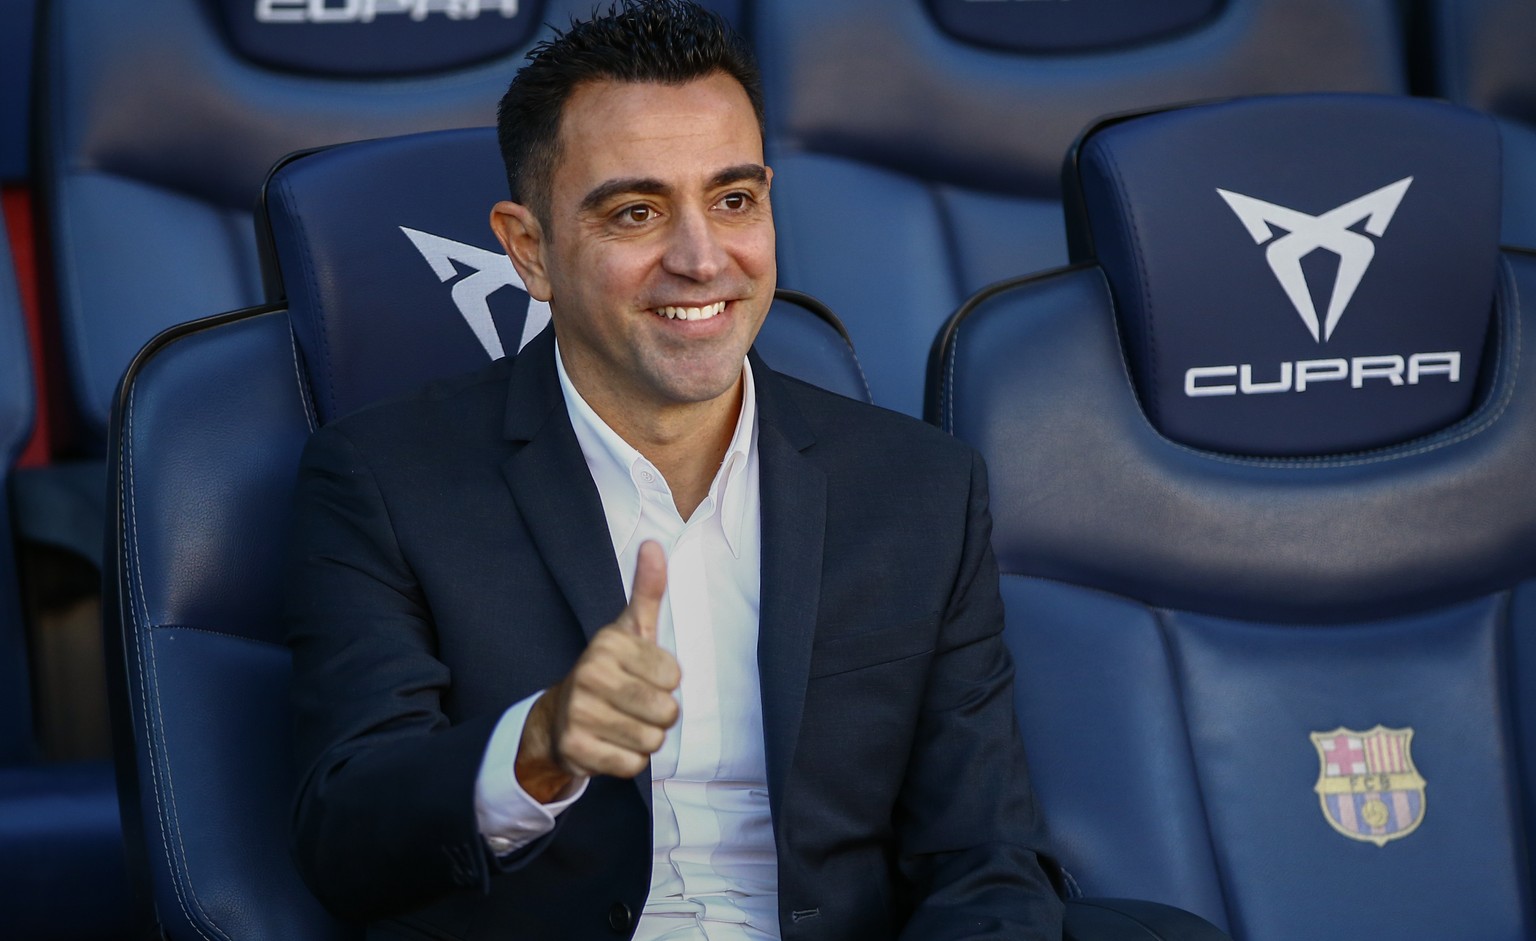 FC Barcelona&#039;s new coach Xavi Hernandez gives a thumb up during his official presentation at the Camp Nou stadium in Barcelona, Spain, Monday, Nov. 8, 2021. Xavi, who thrived in Barcelona&#039;s  ...